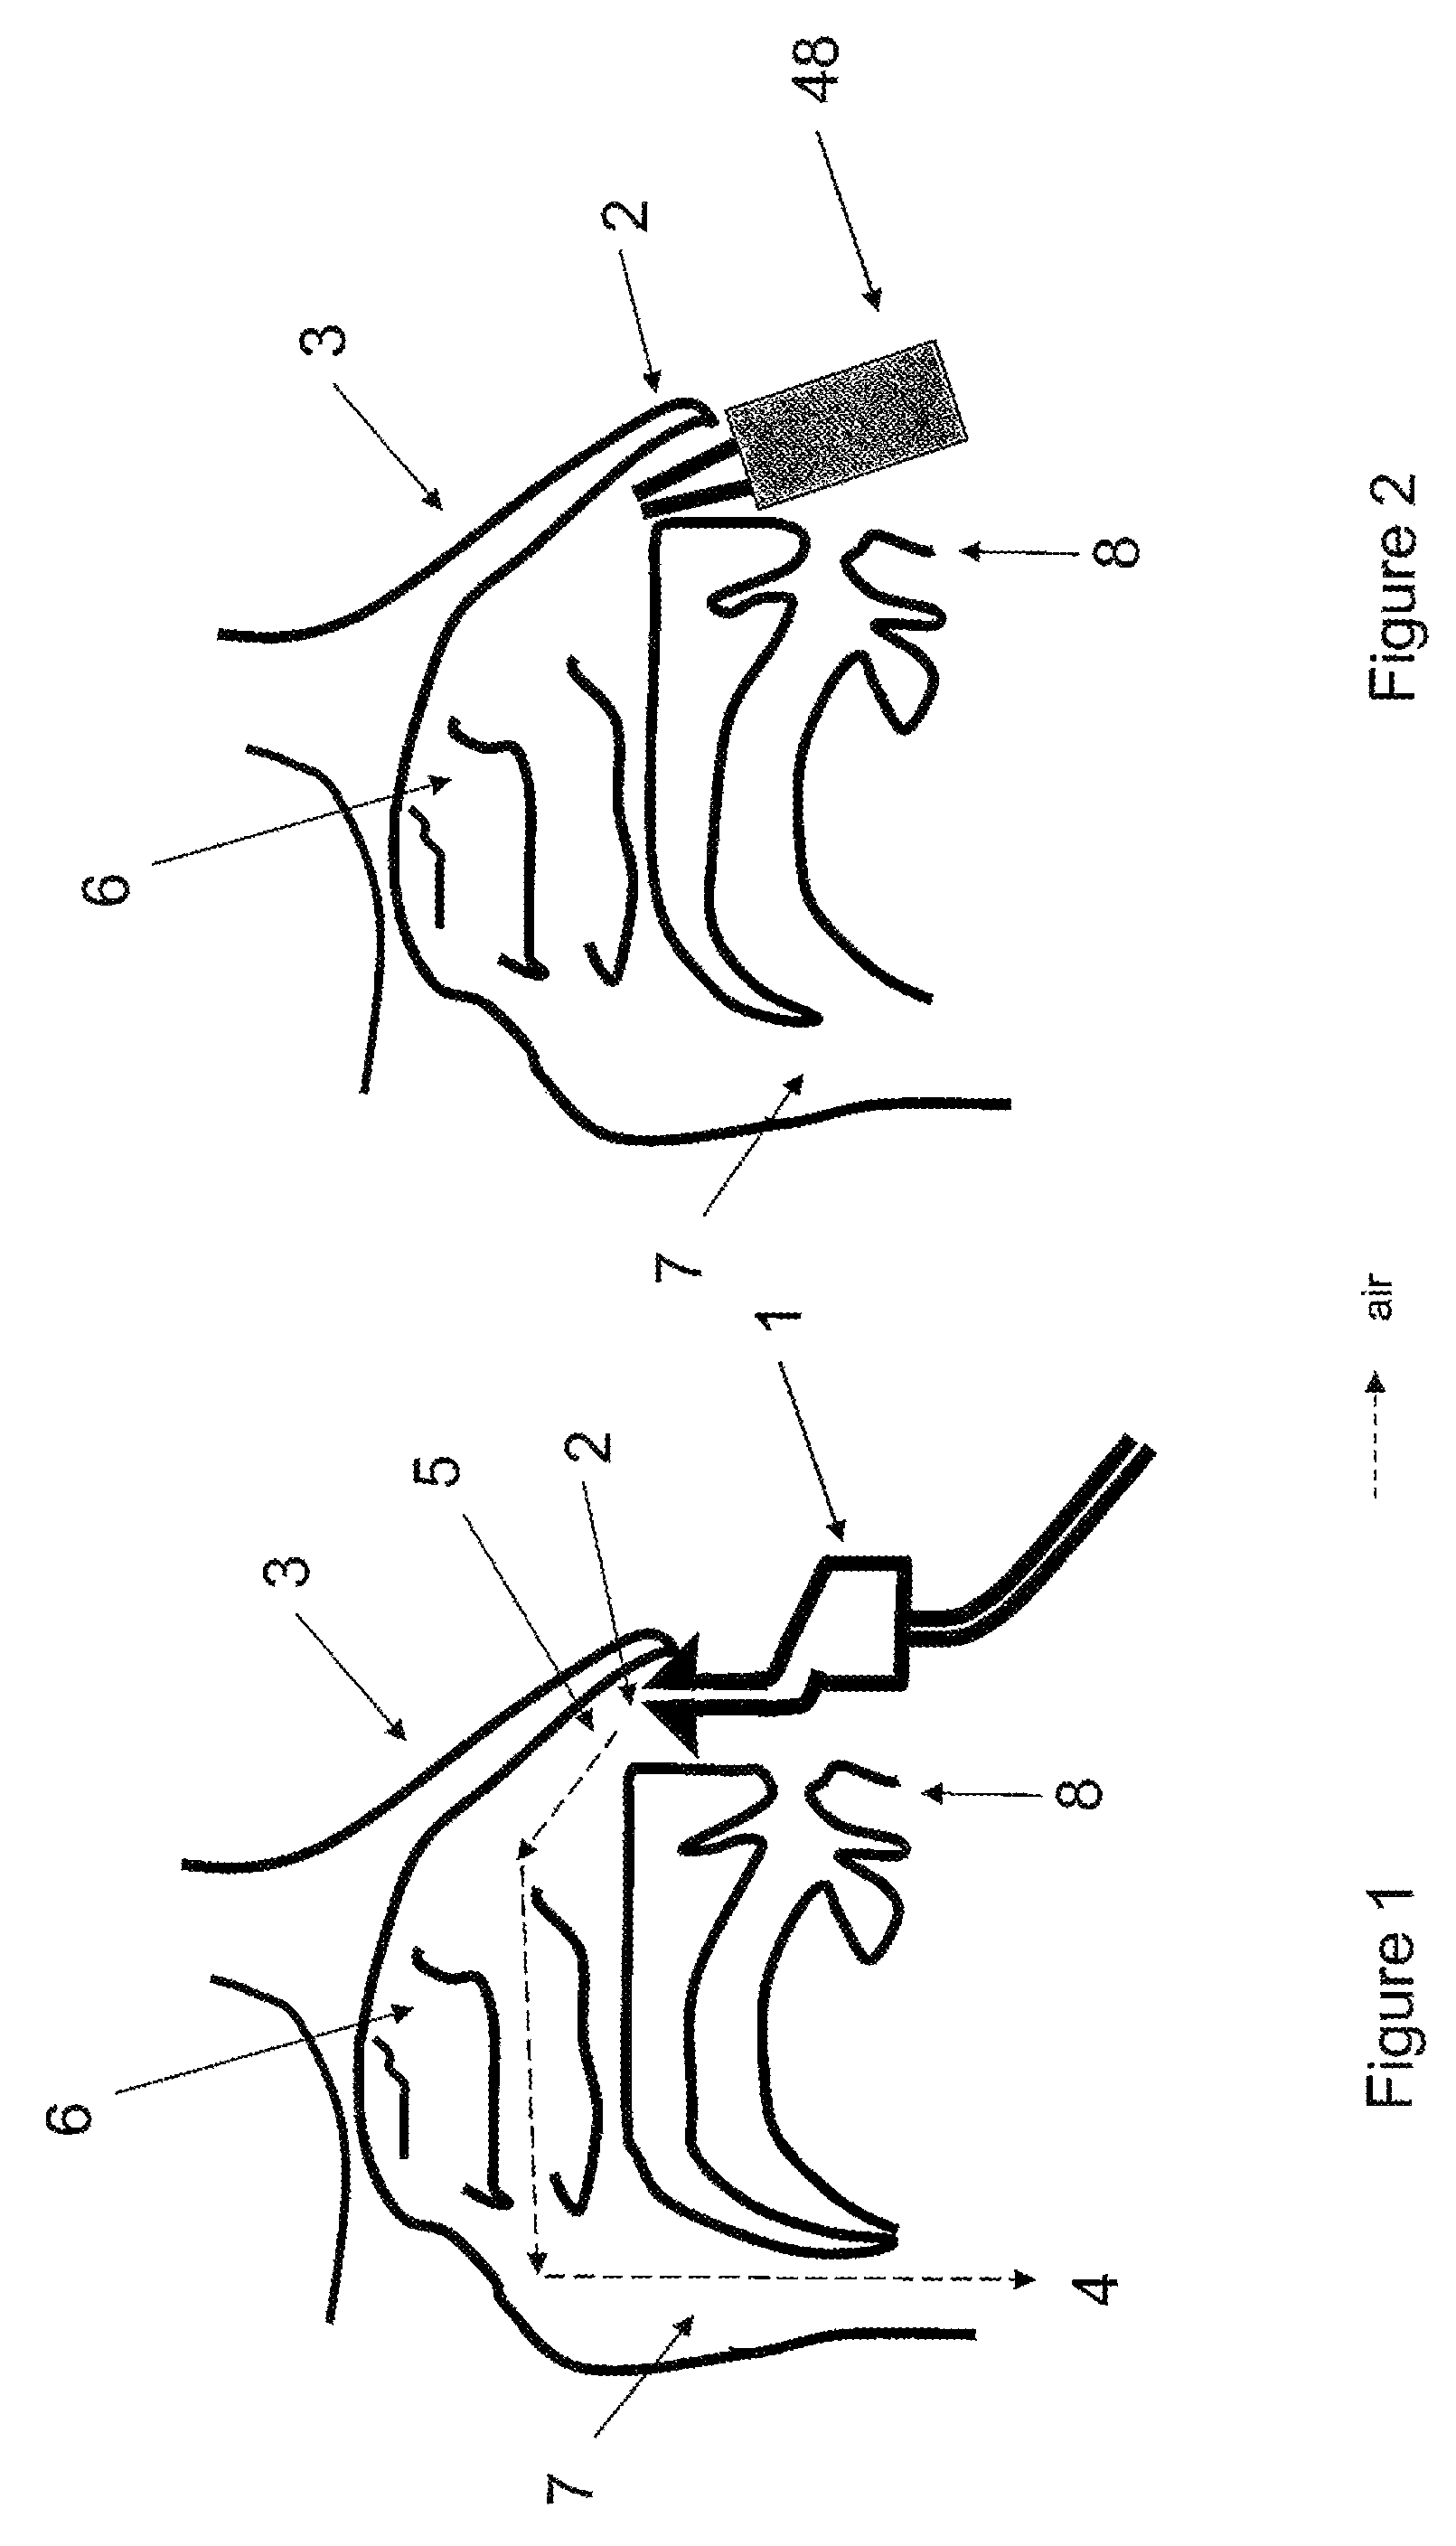 Device for oral administration of an aerosol for the rhinopharynx, the nasal cavities or the paranasal sinuses